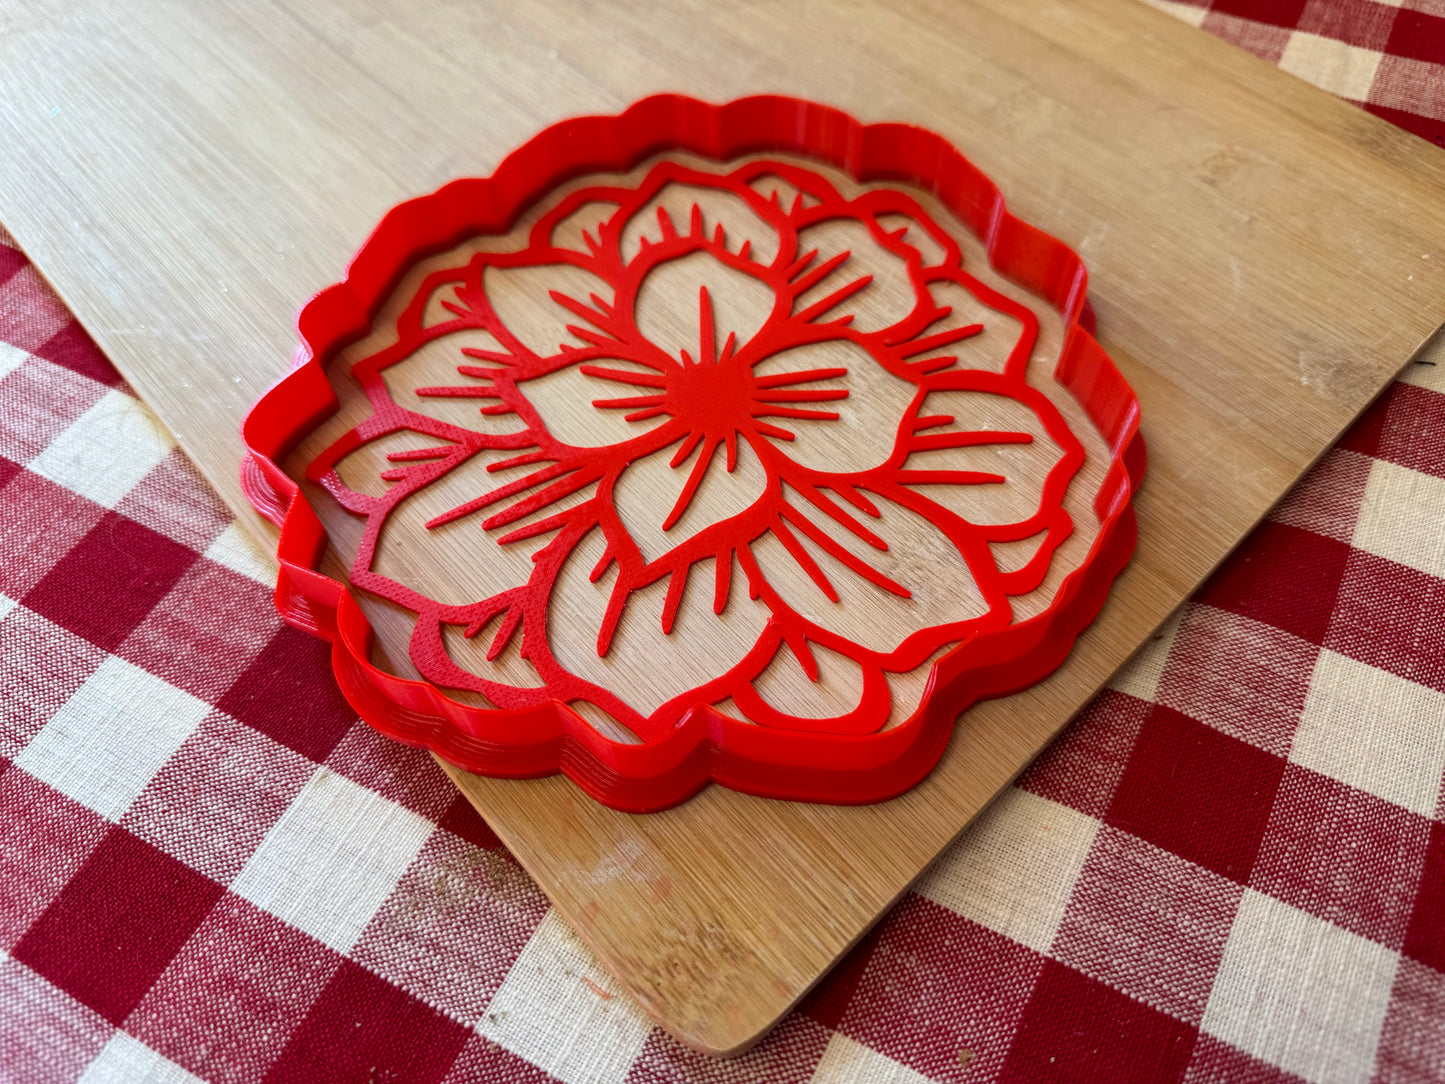 Flower Bunch Pottery Stamp or Stencil w/ optional cutter - Plastic 3d printed, multiple sizes available